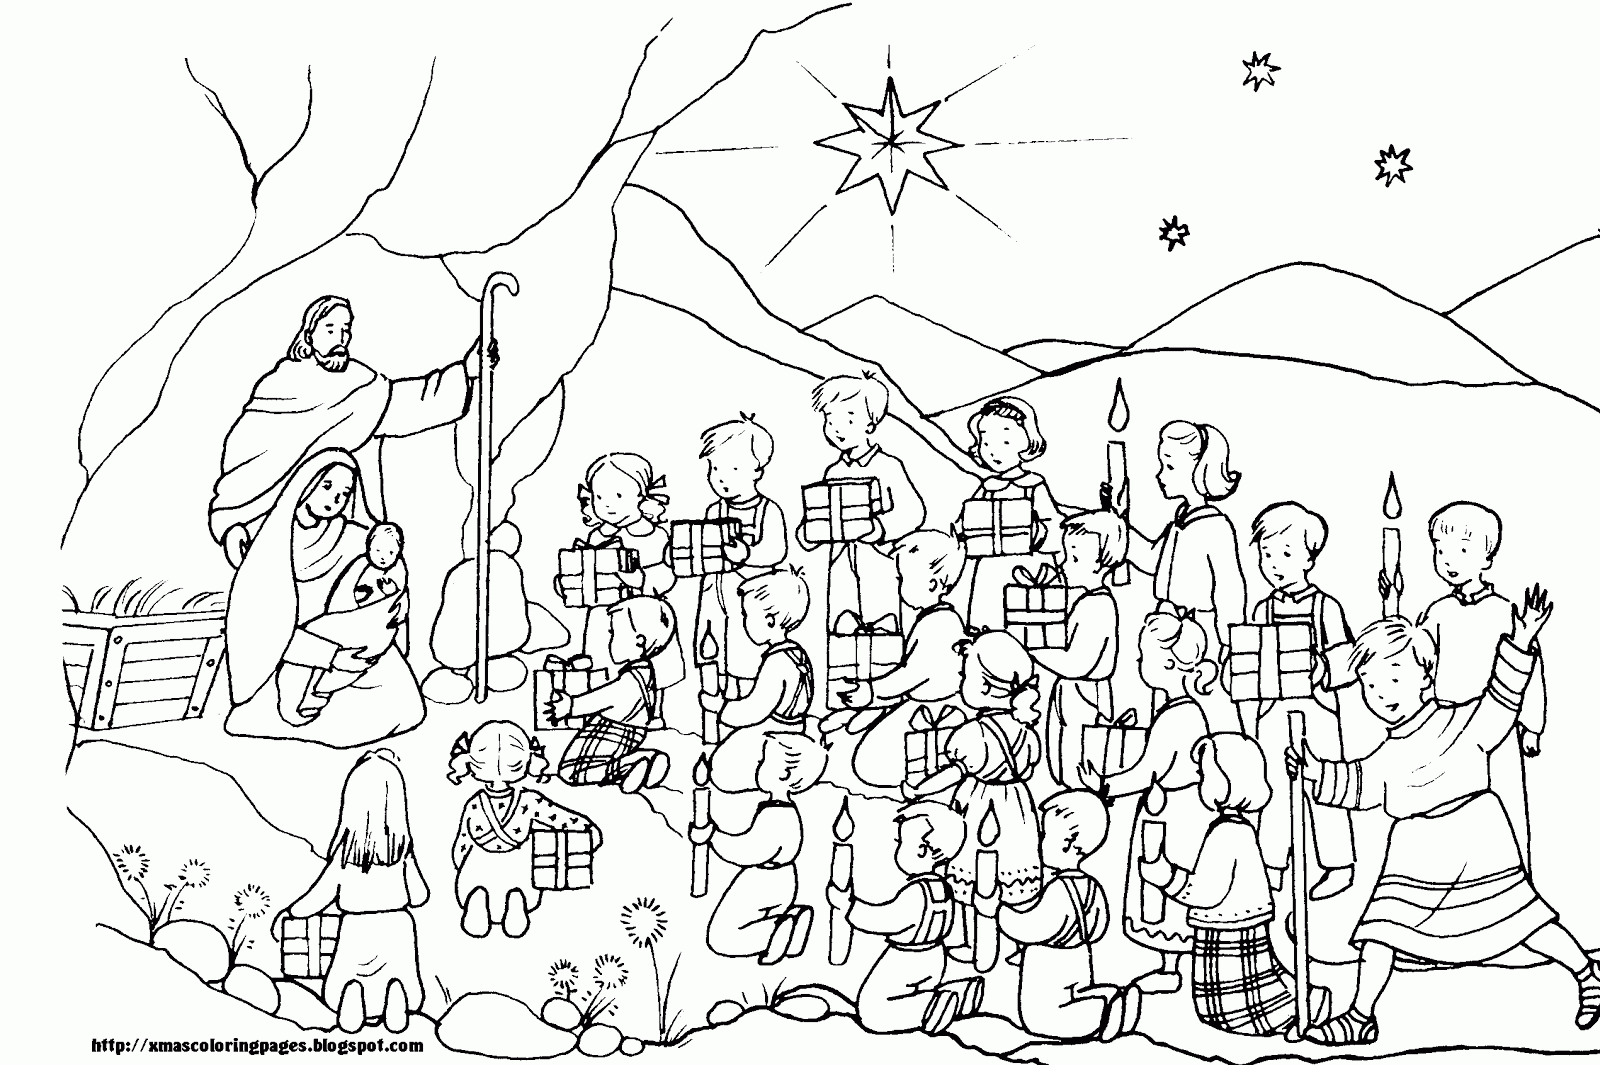 Here are two religious coloring pages for Christmas one is Mary and Baby Jesus and he other shows many children attending the nativity which is rather